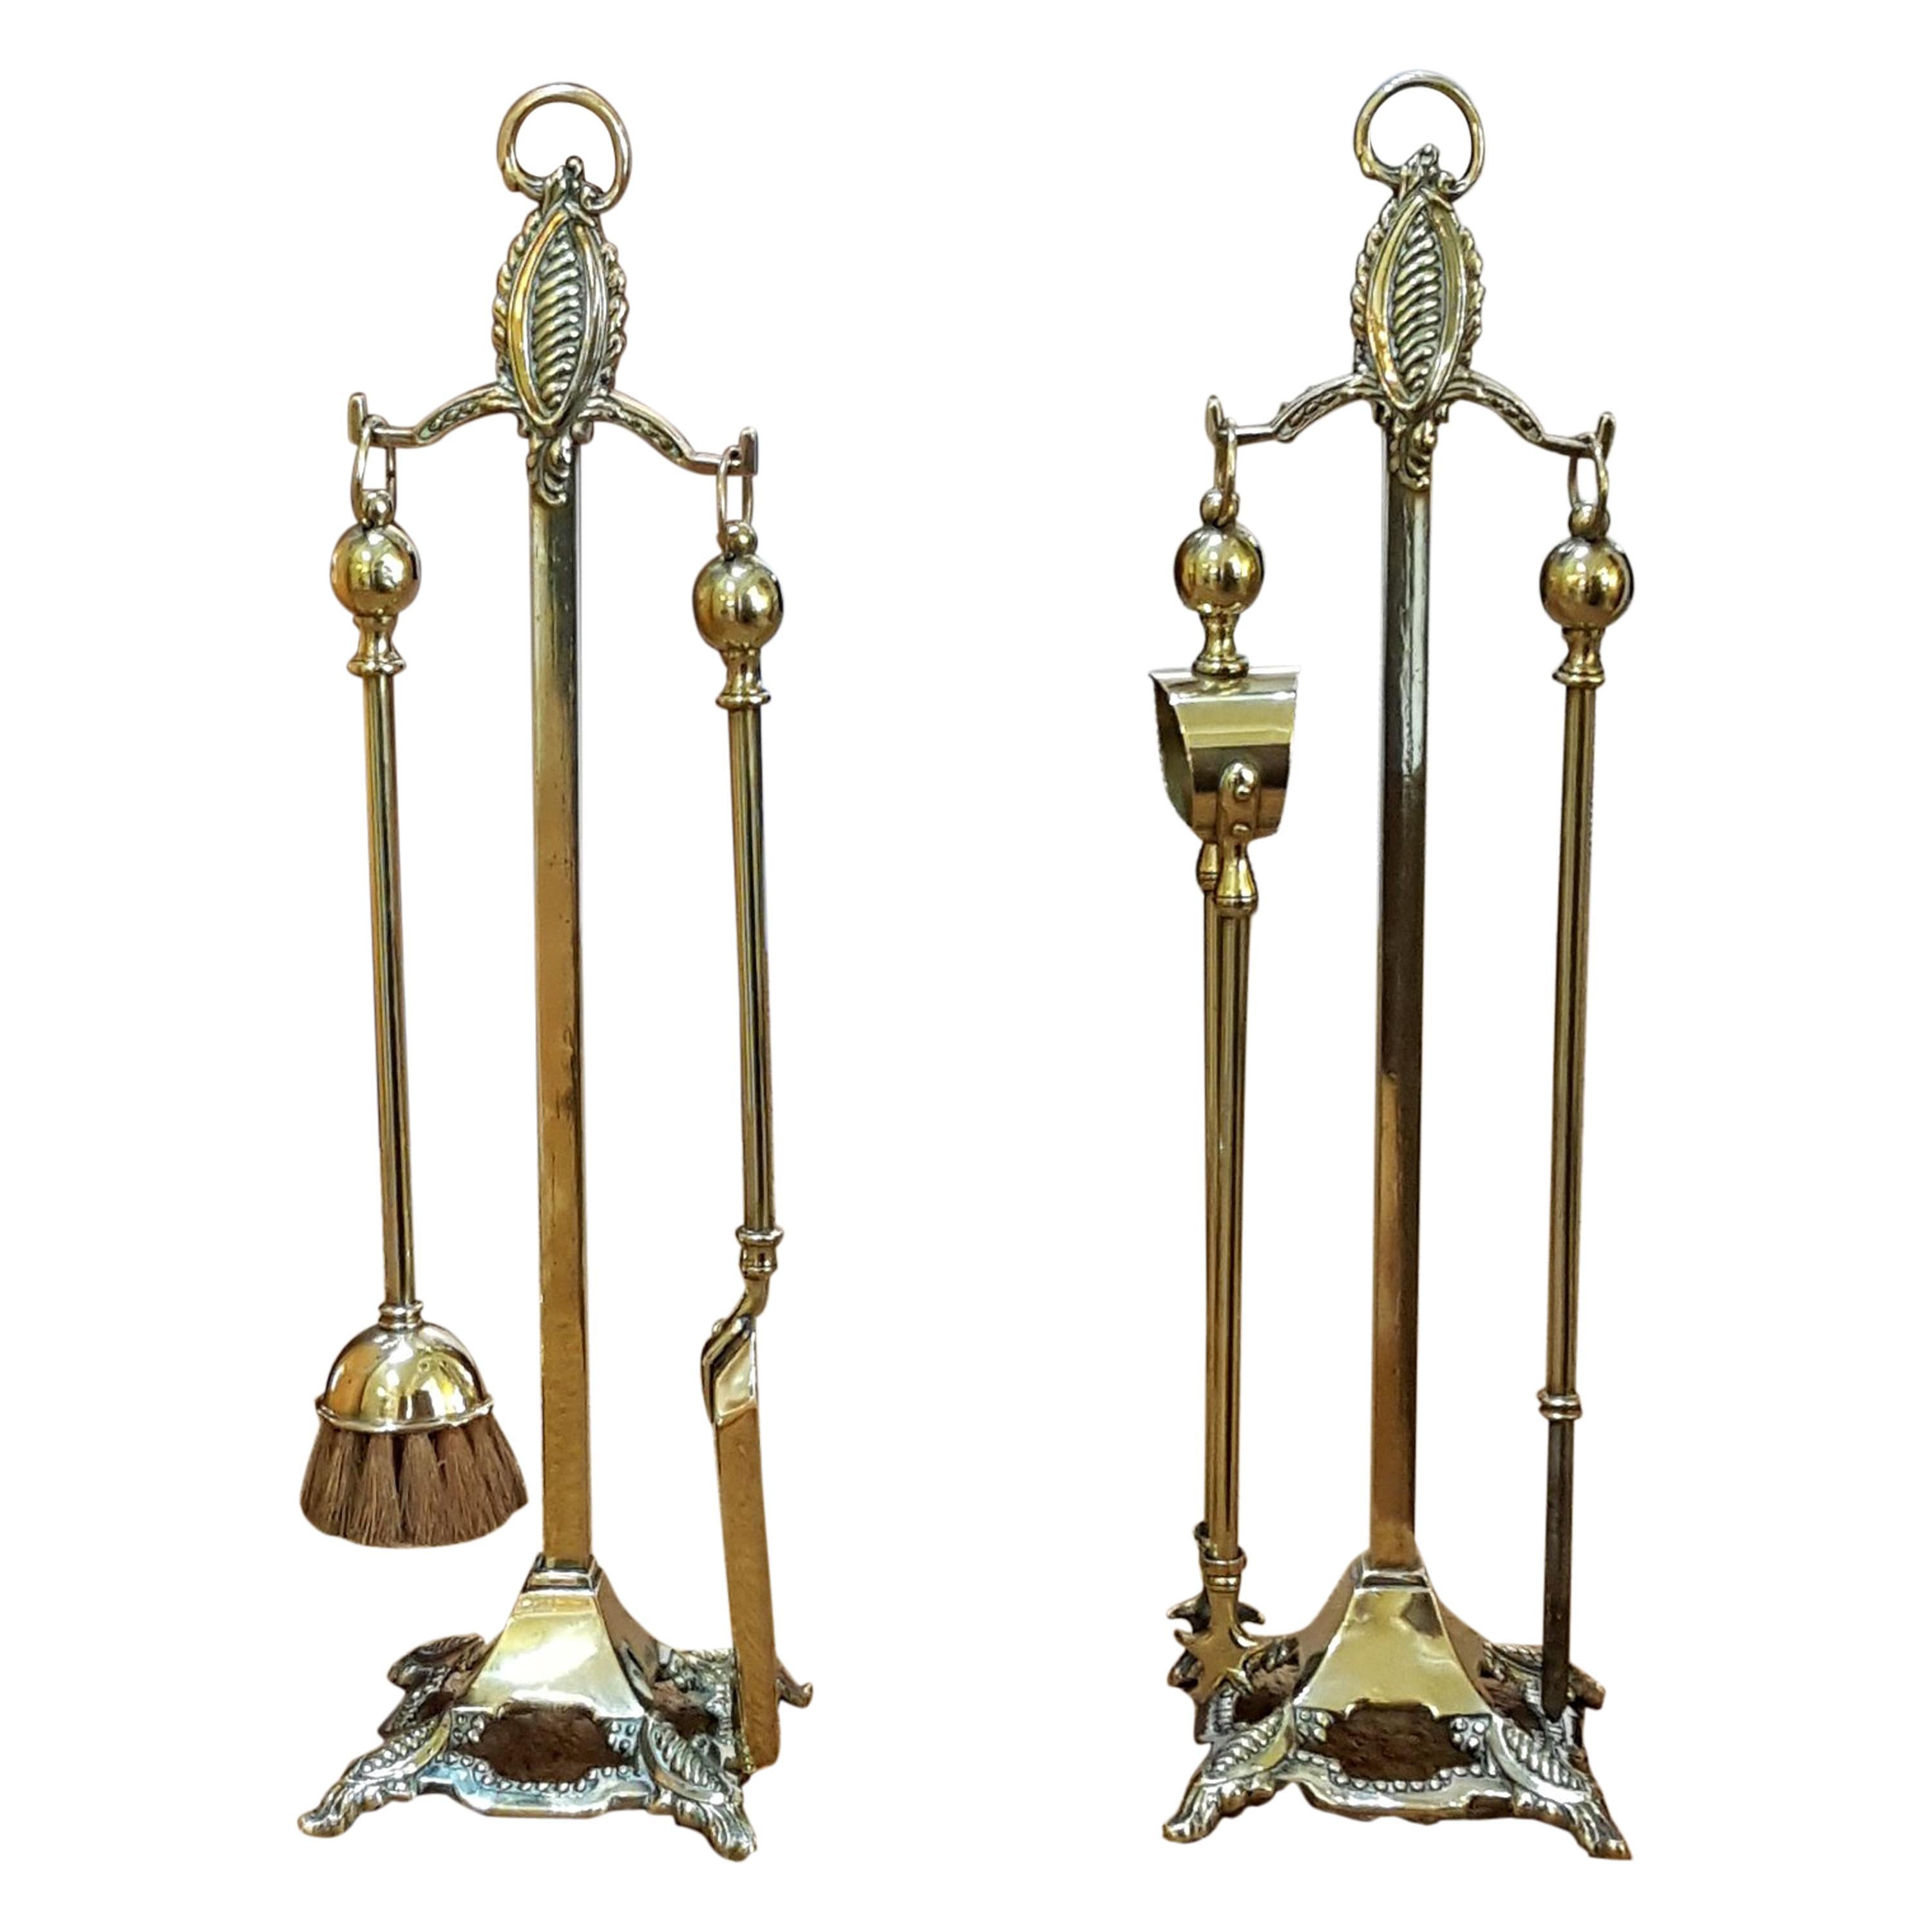 Pair of Edwardian Brass Fire Side Companions